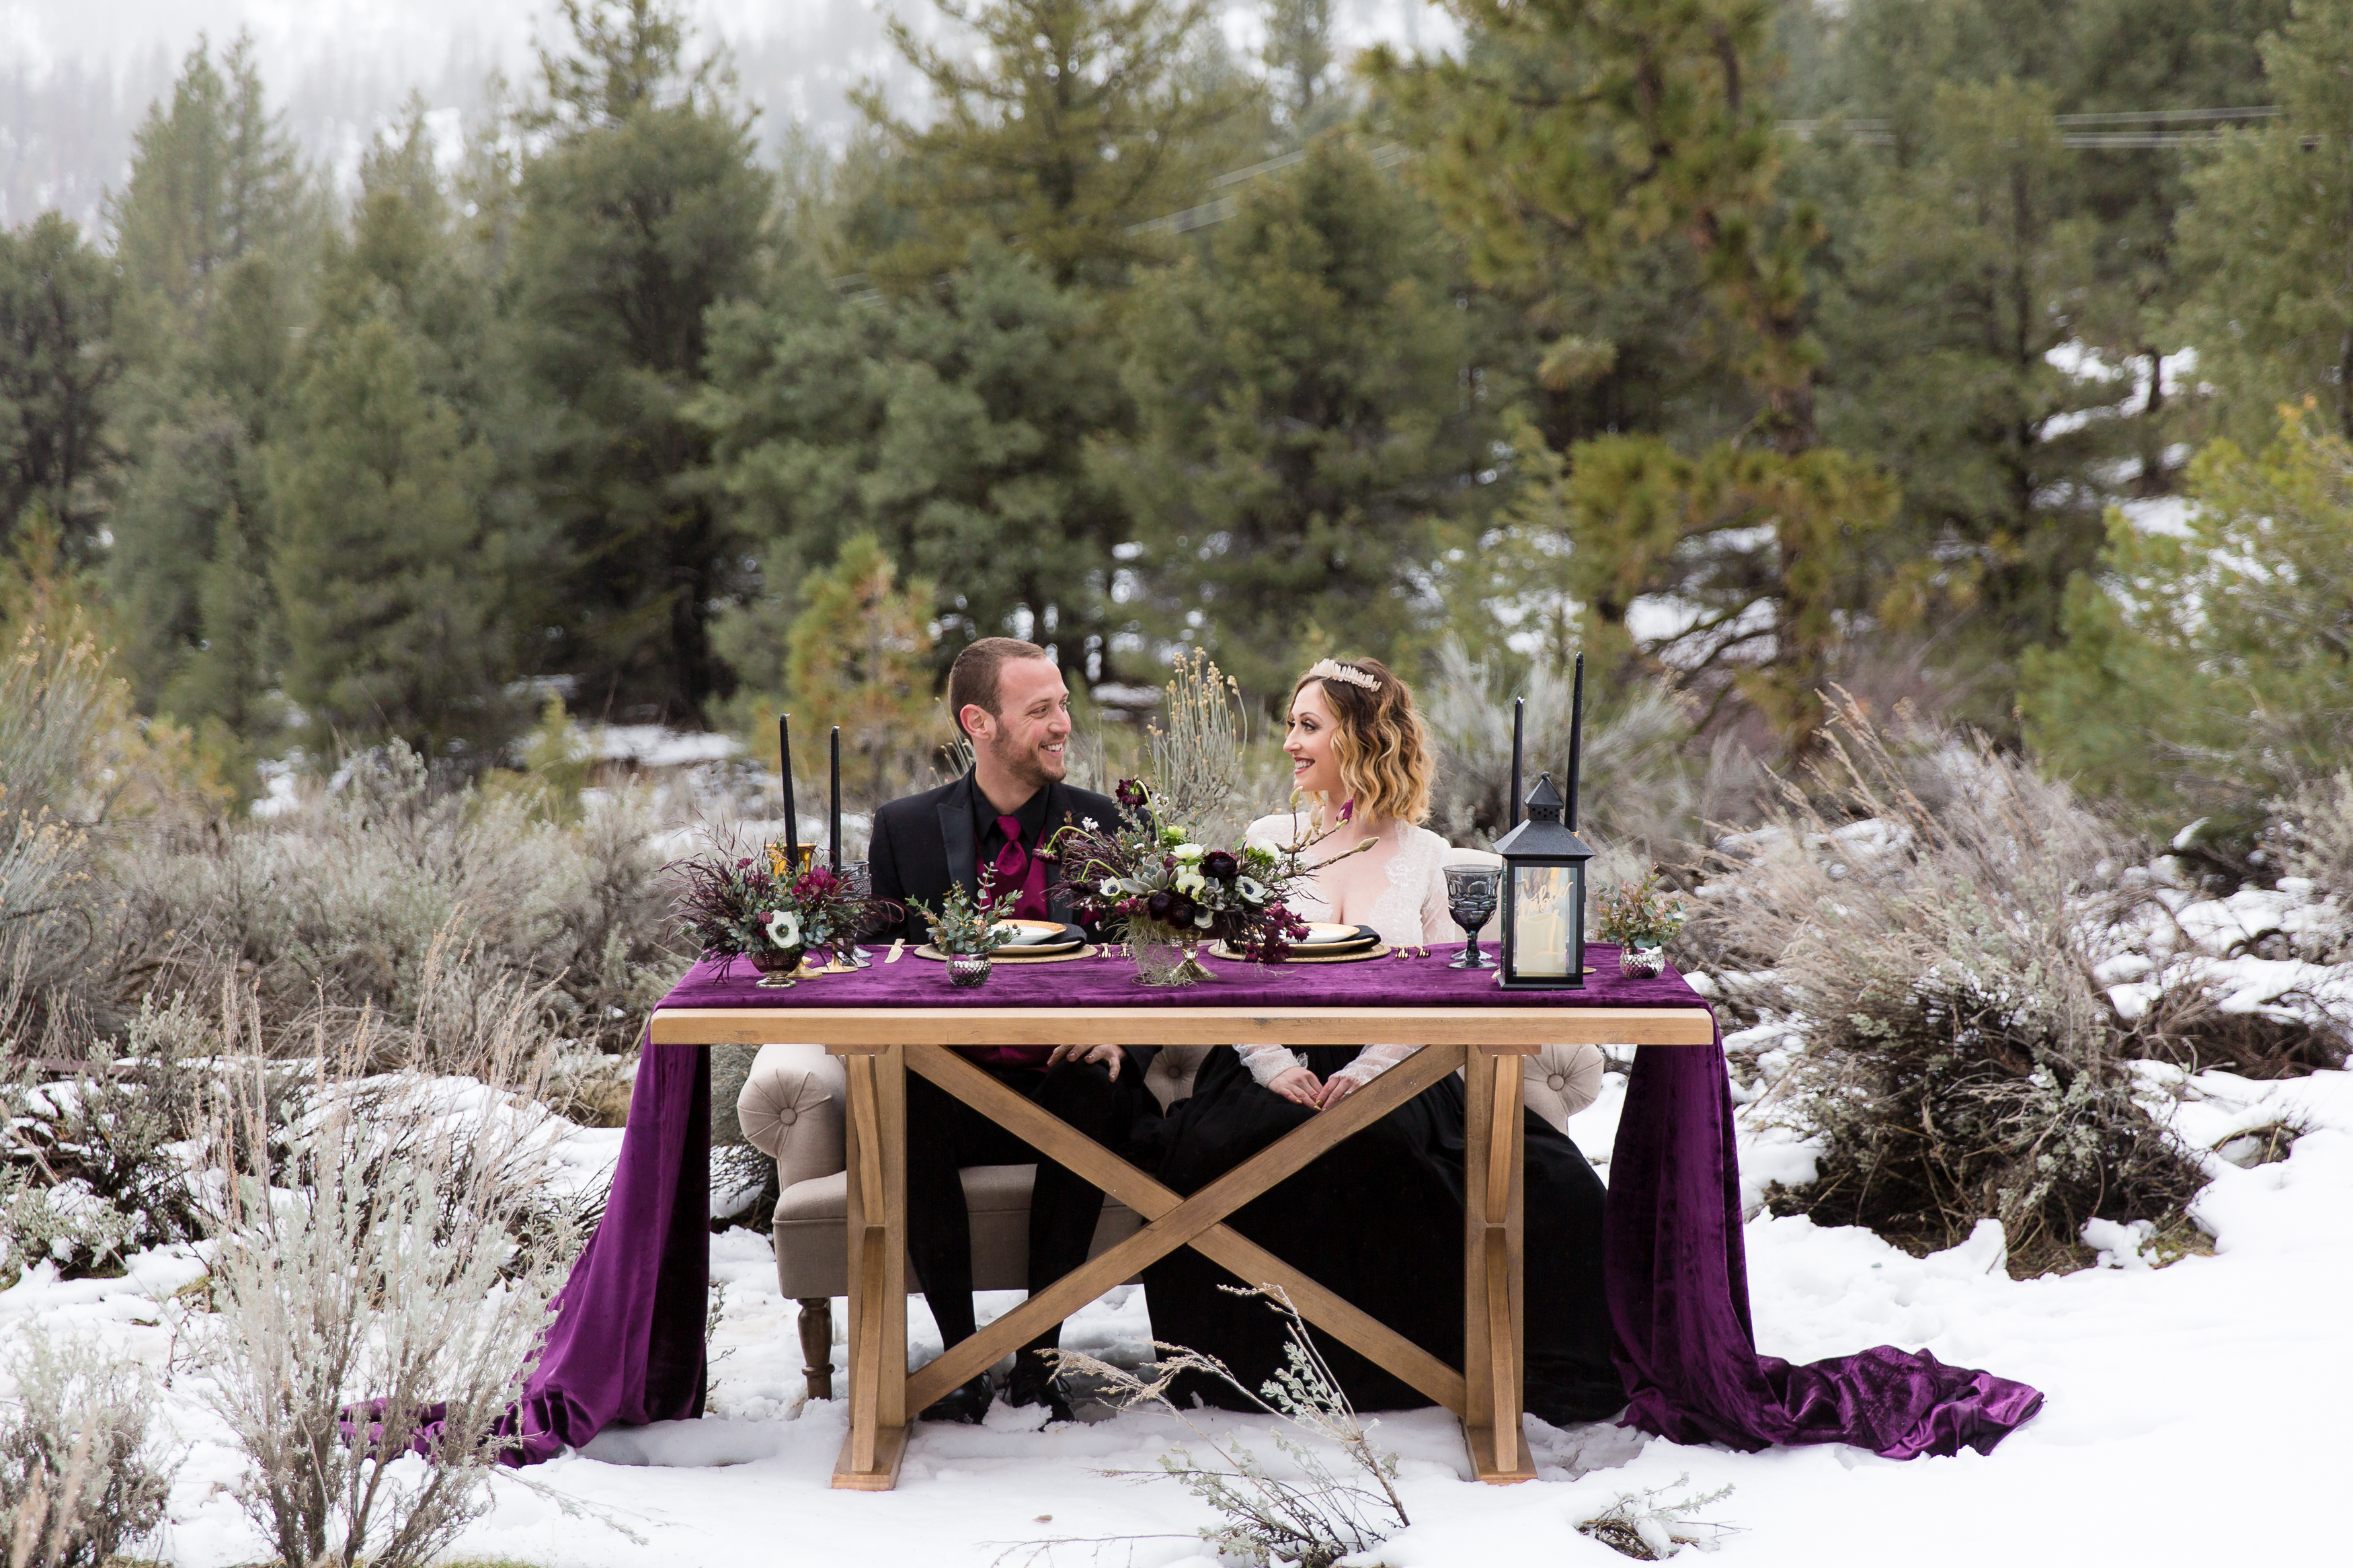 Married couple smiling at each other at sweetheart table in snow